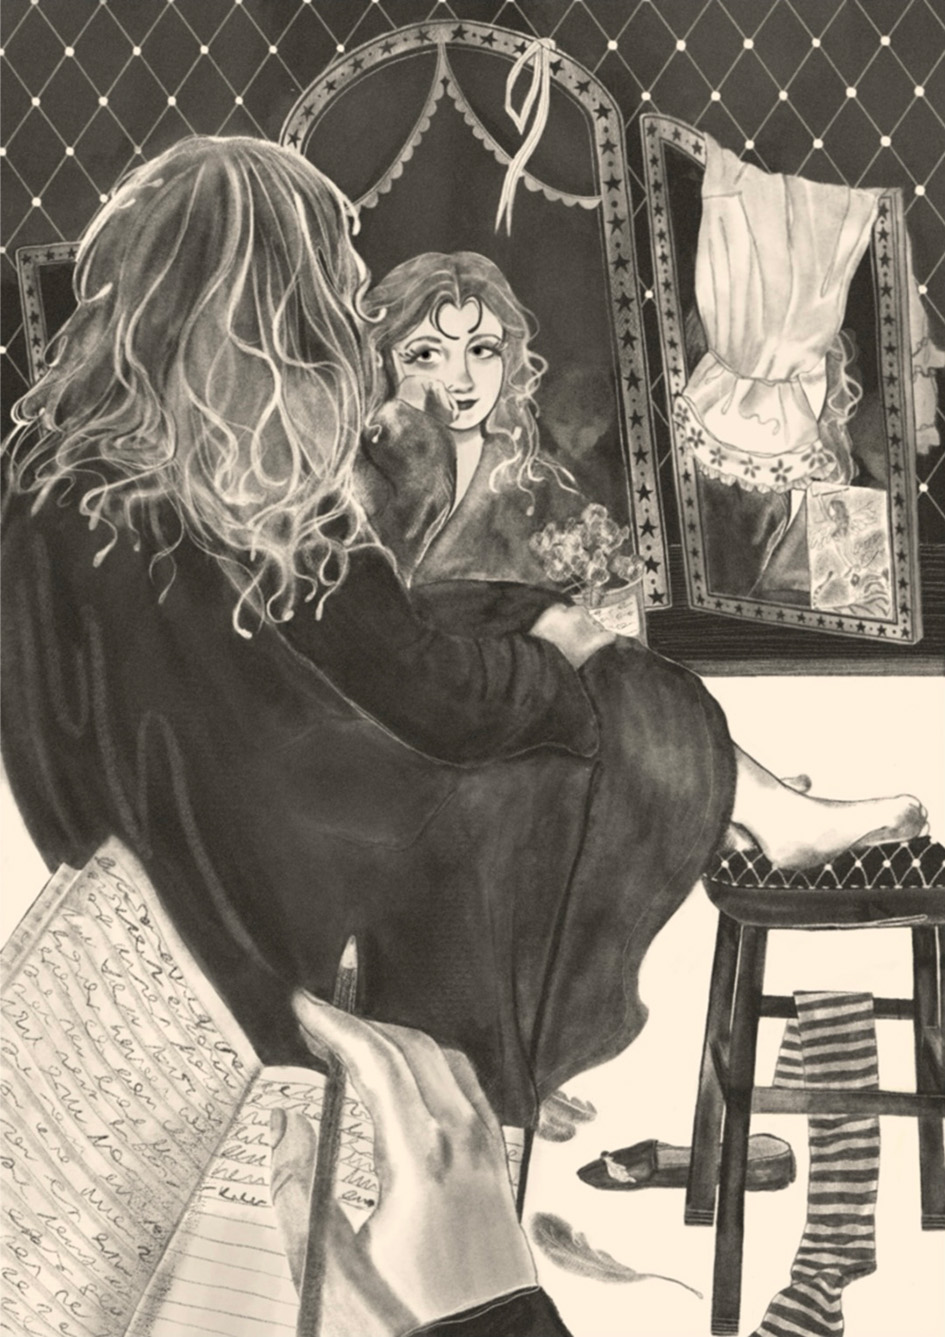 Illustration of girl looking in mirror and someone behind her writing in book